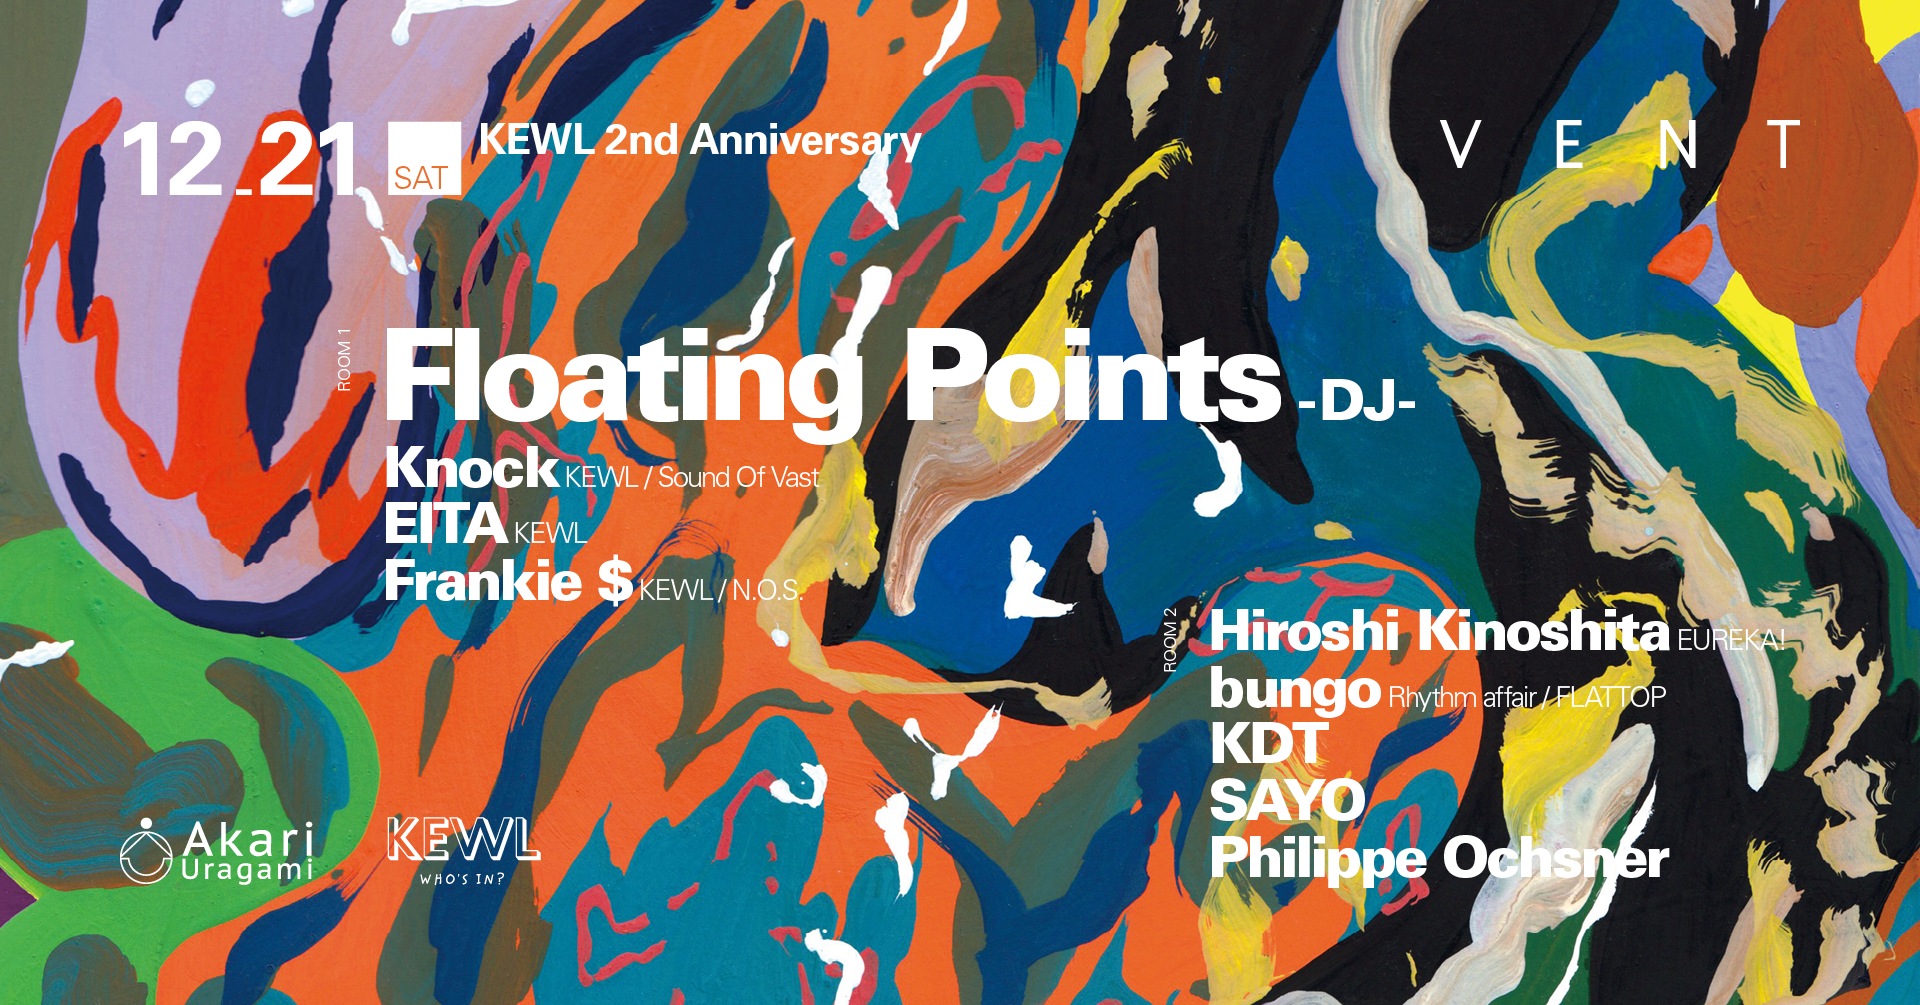 Floating Points at KEWL 2nd Anniversary 